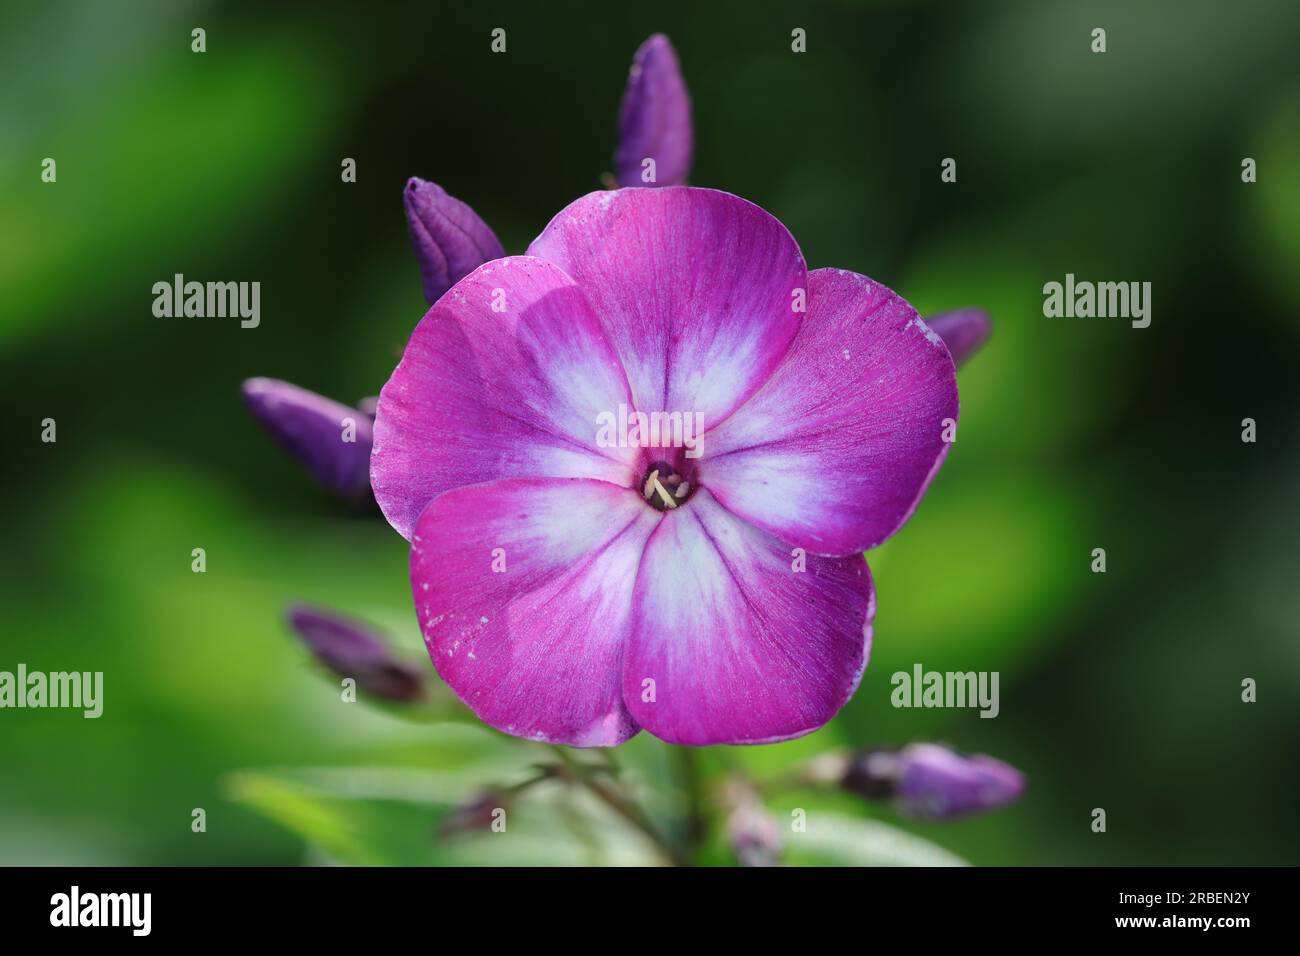 Close-up of a single two-tone phlox paniculata flower with purple and white colorations against a dark green blurry background, copy space Stock Photo